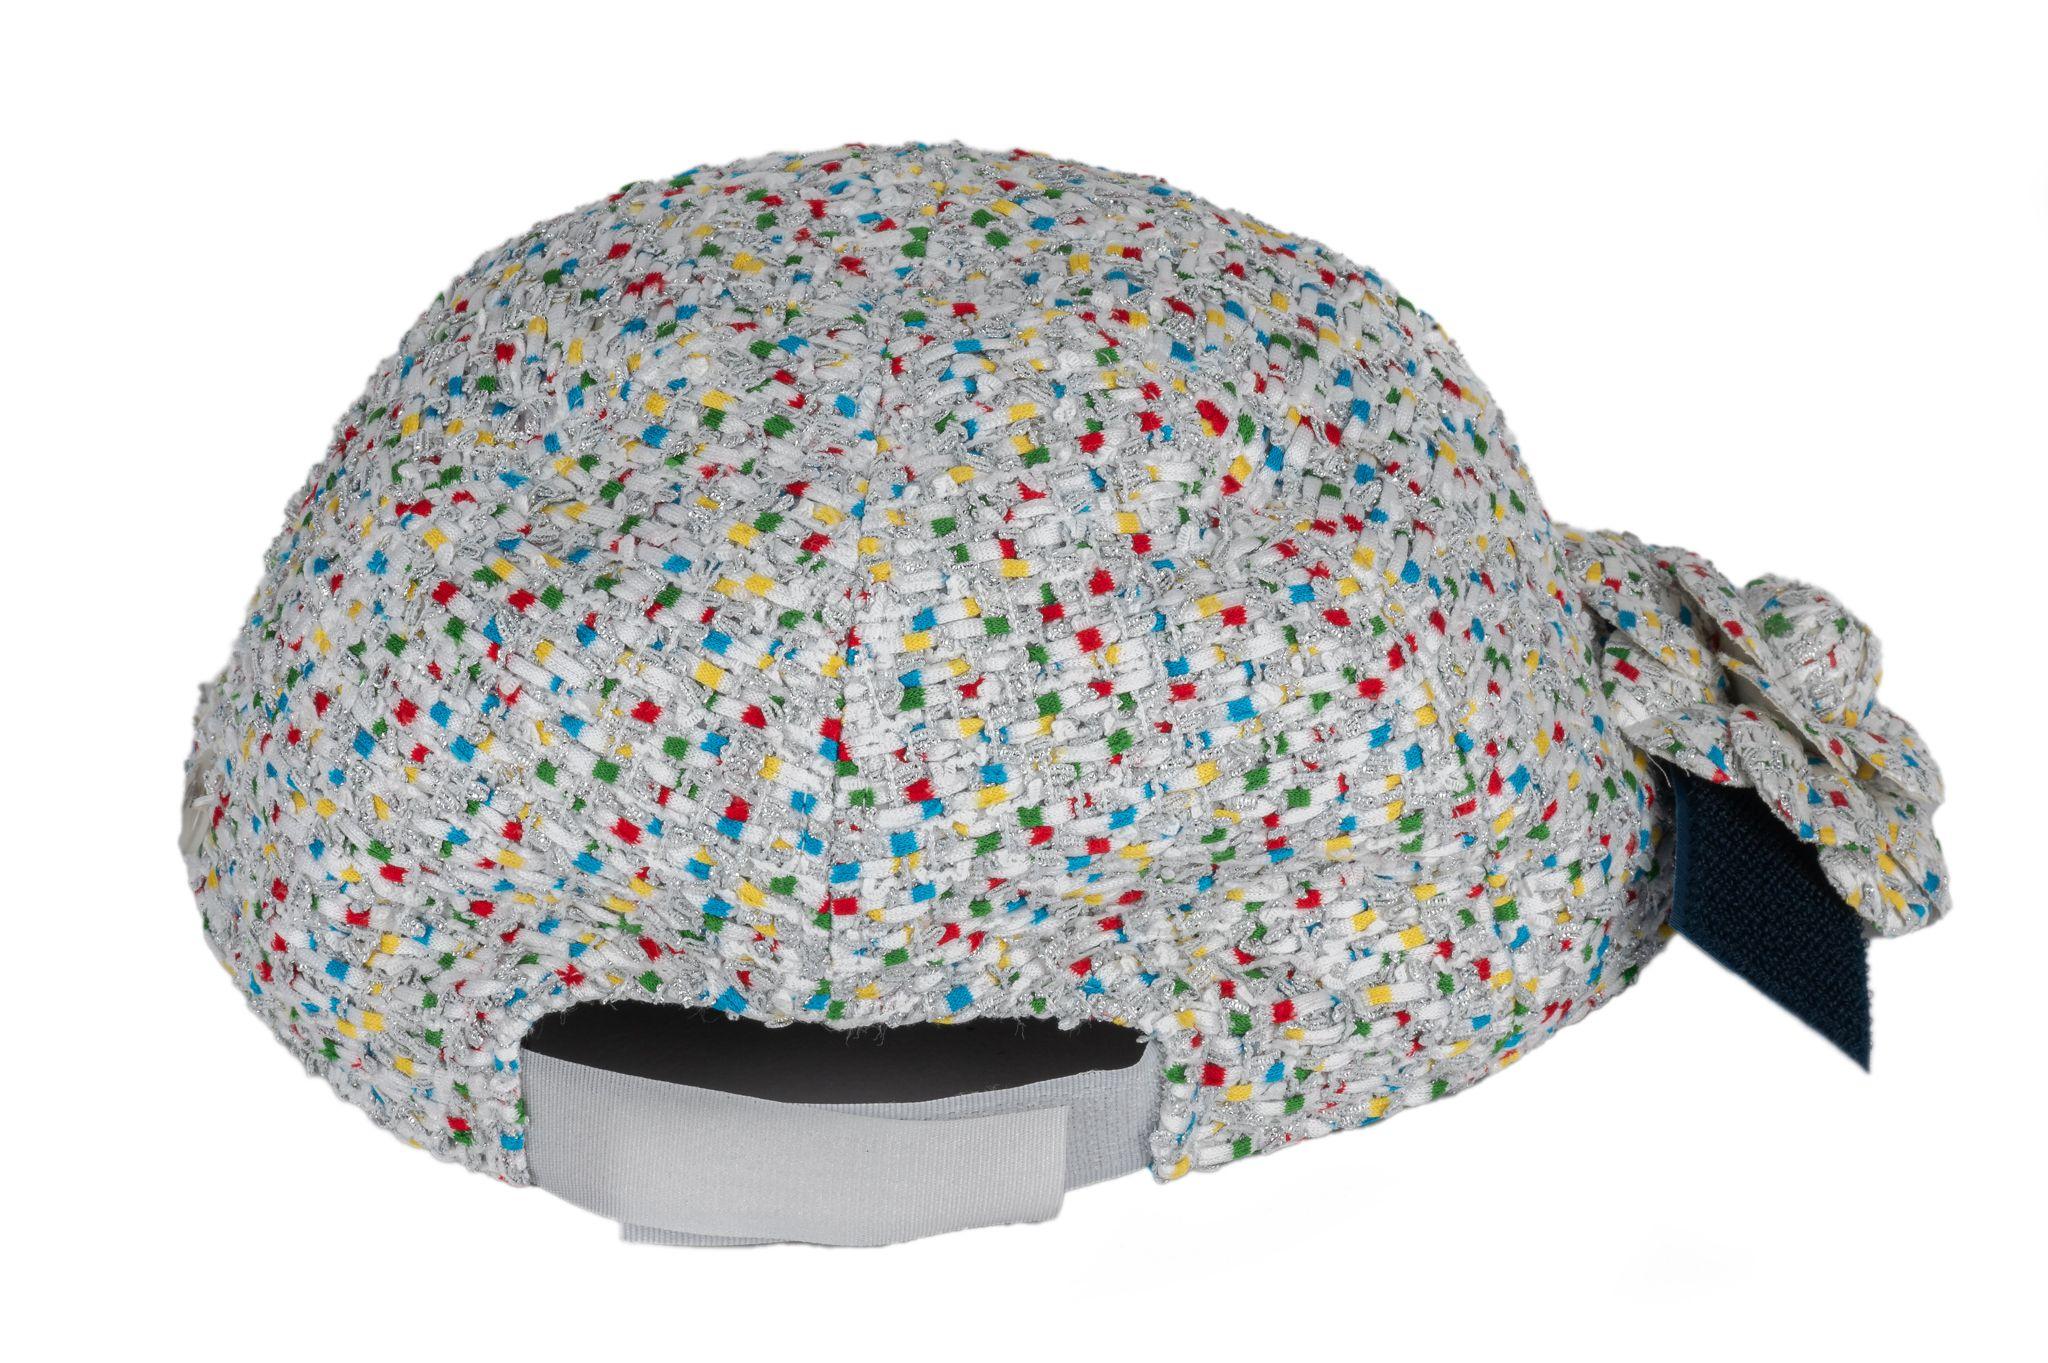 Chanel new white tweed and multicolor baseball hat, medium with adjustable back velcro strap. Detachable camellia pin, can be worn separately. Comes with original box.